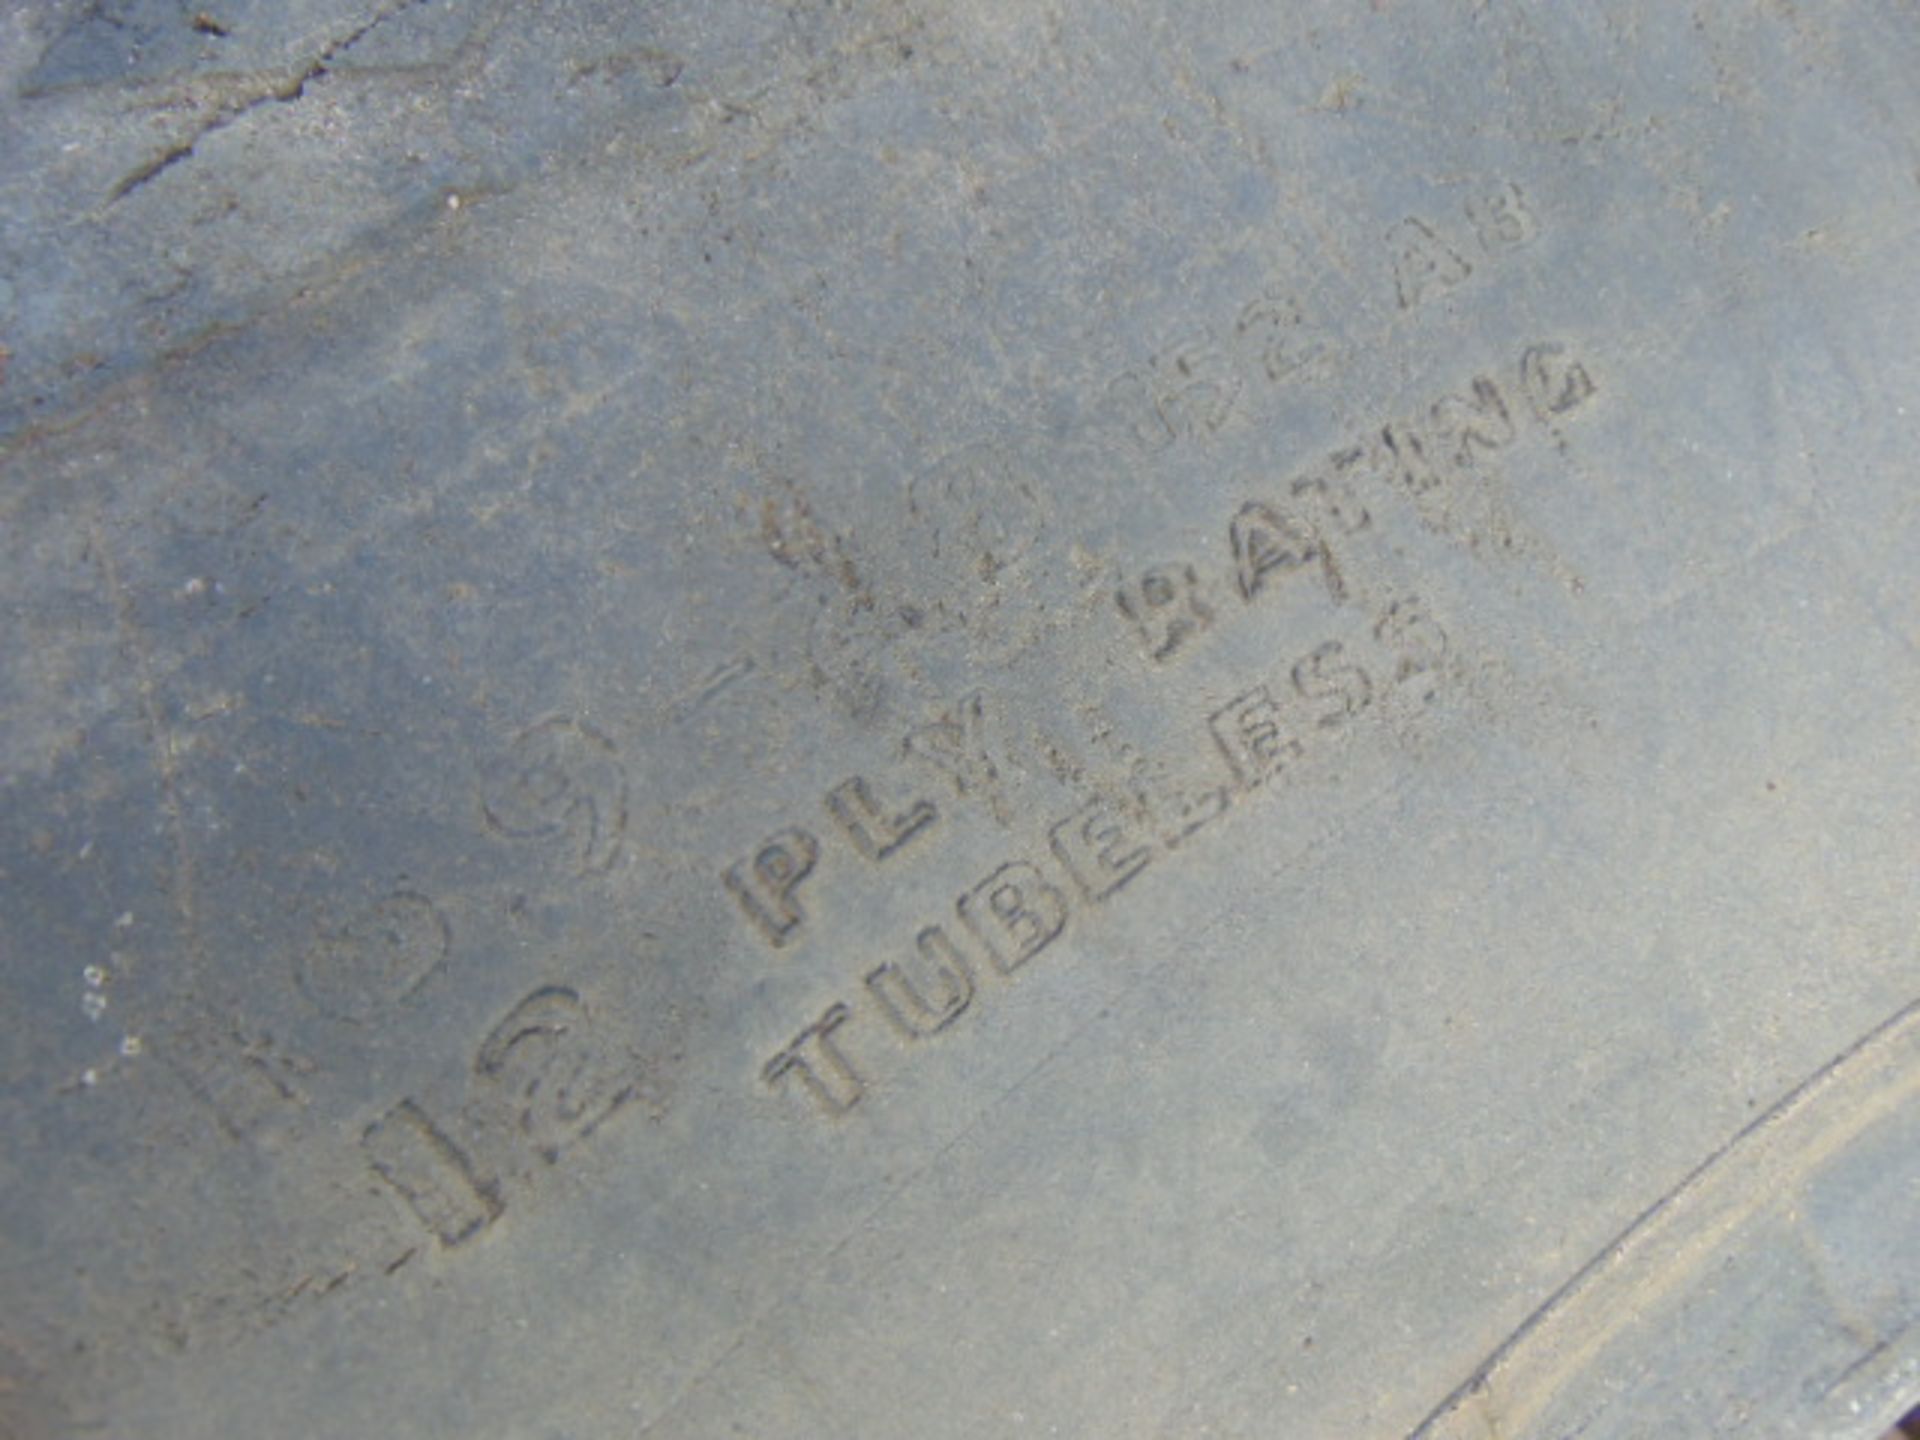 1 x Goodyear Industrial Sure Grip 16.9-28 Tyre - Image 6 of 6